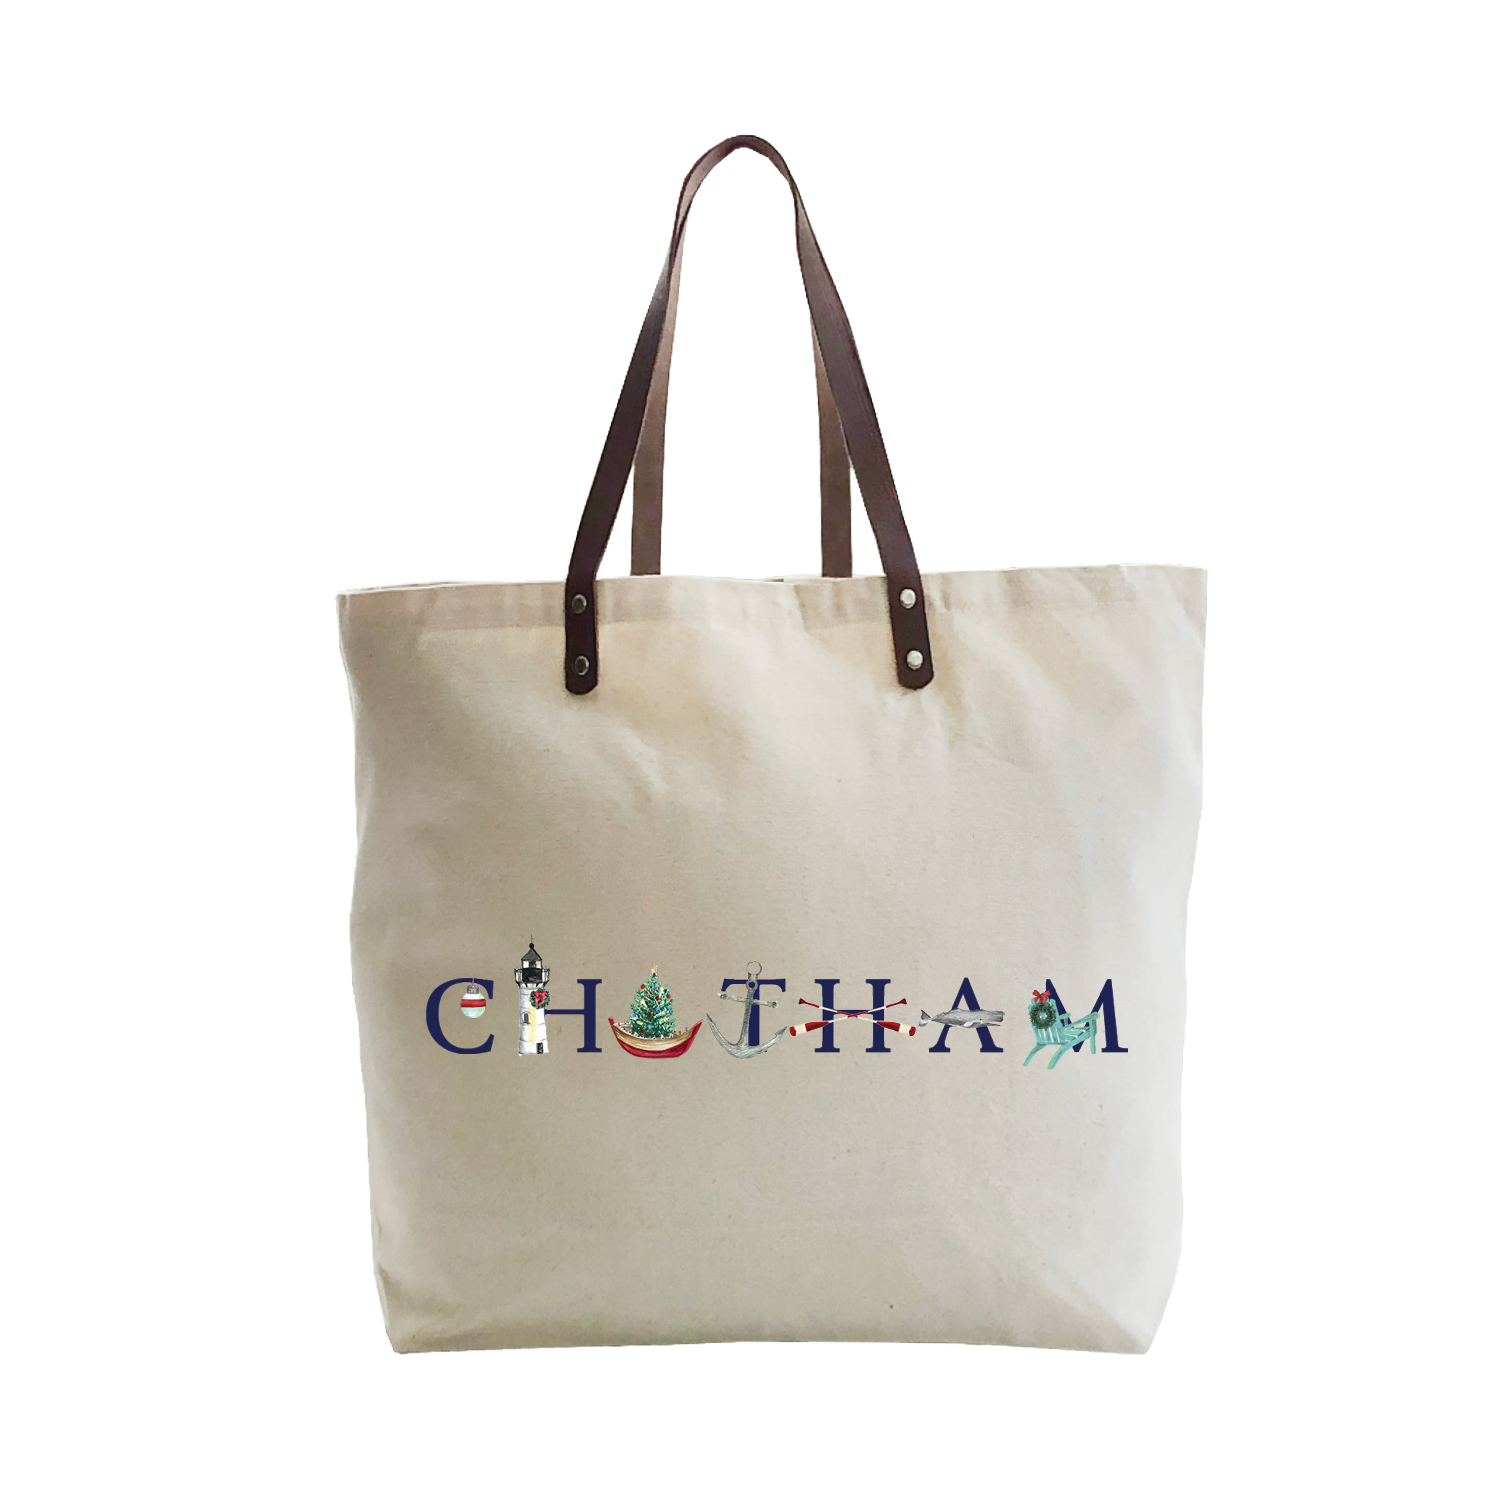 chatham winter large tote